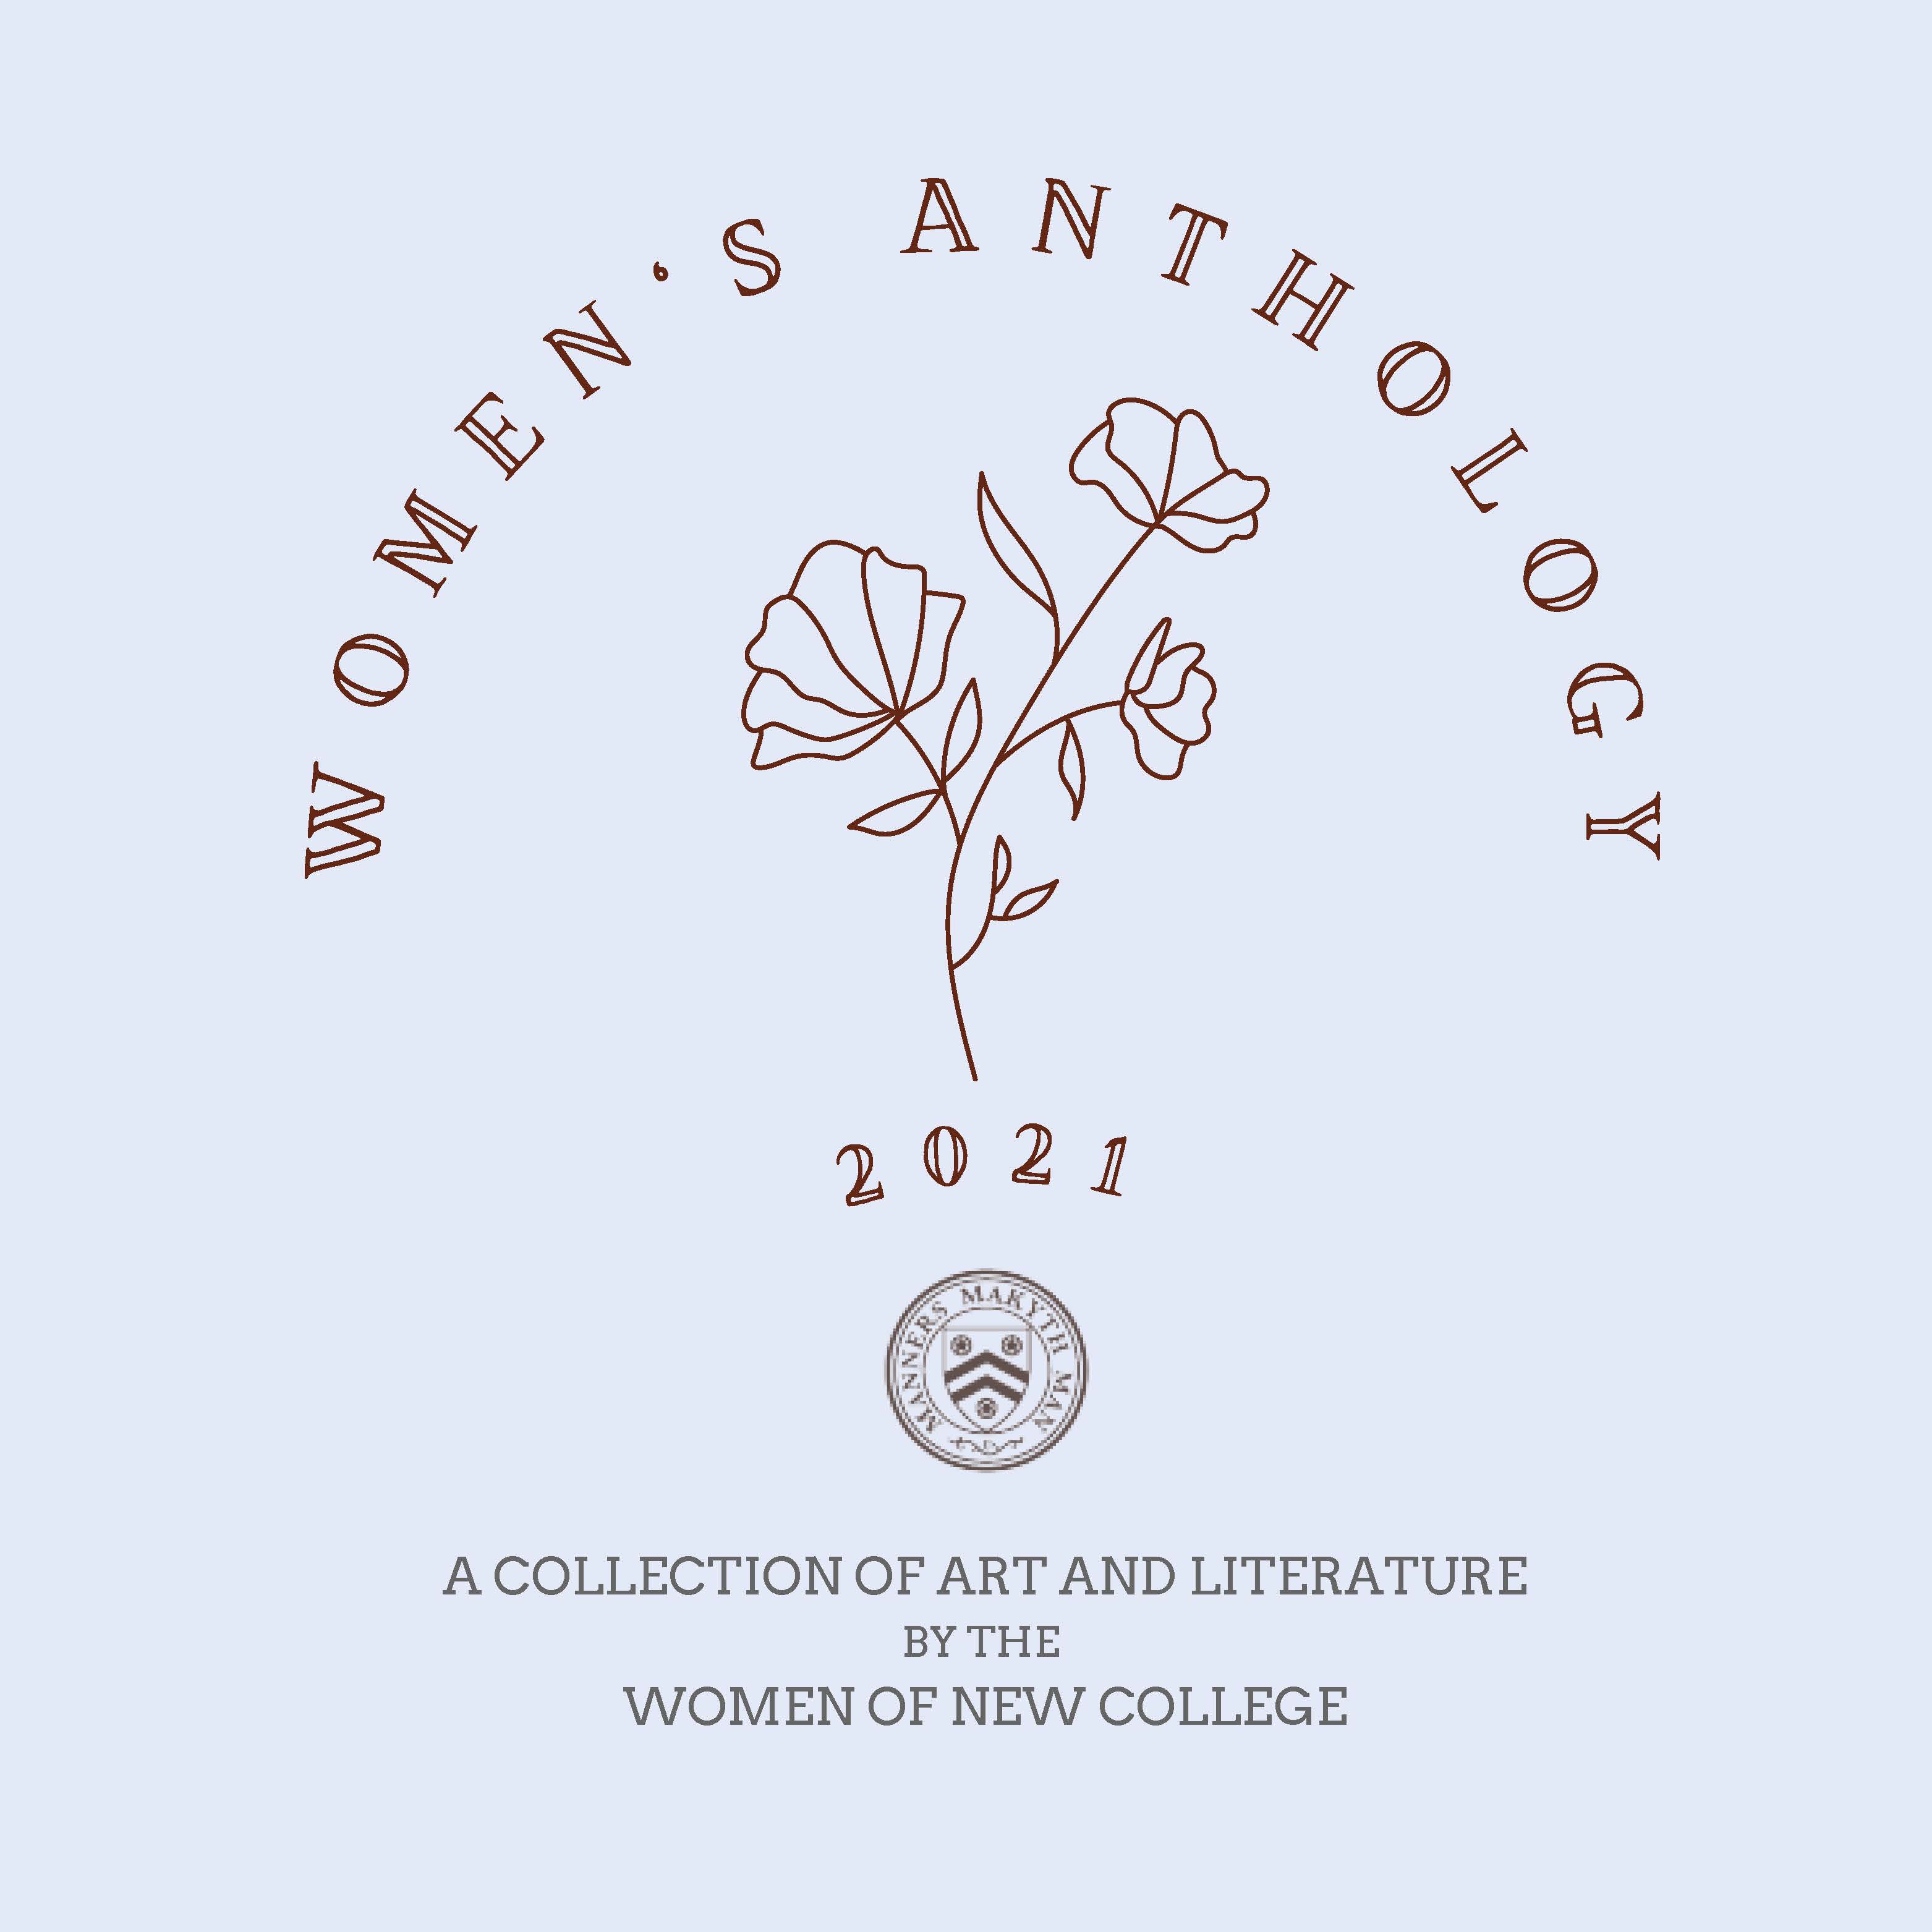 Drawn flowering plant surrounded by the words 'Women's Anthology 2021'